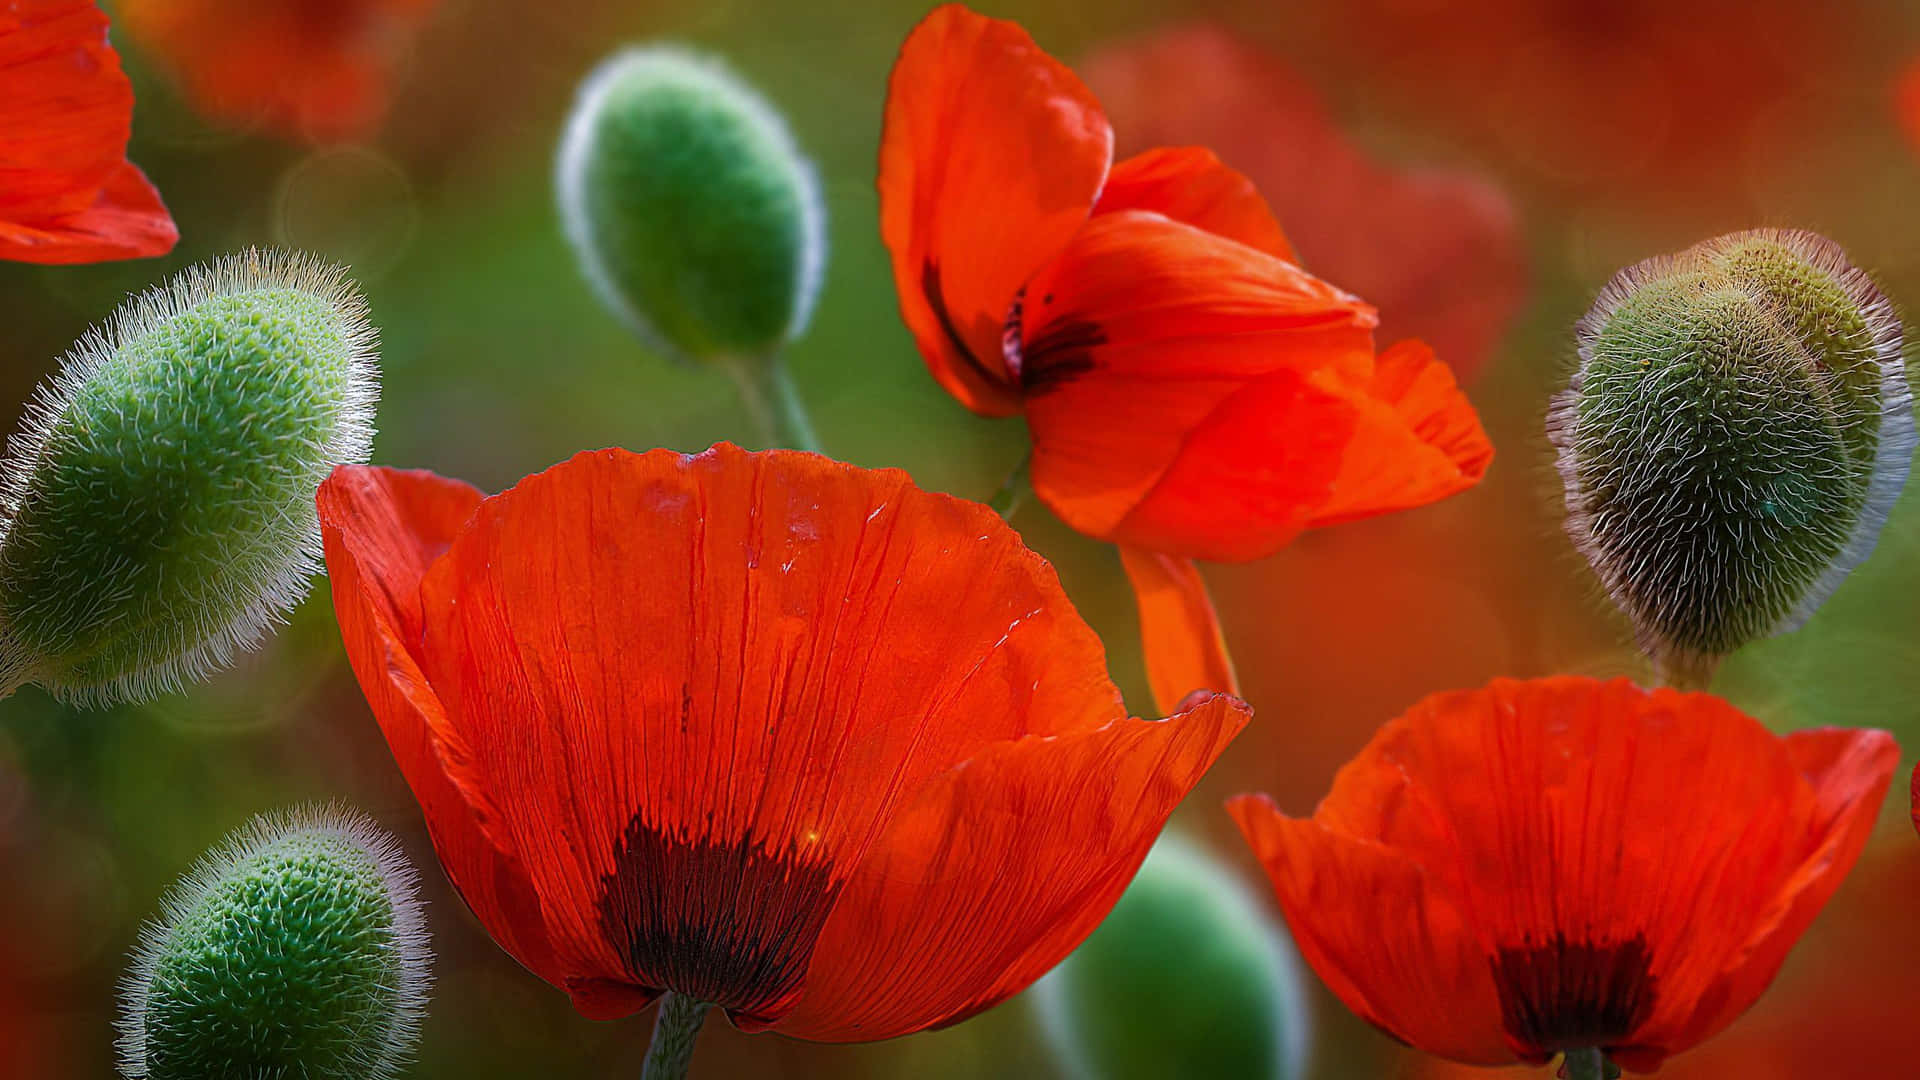 Poppy: A Symbol of Remembrance and Respect